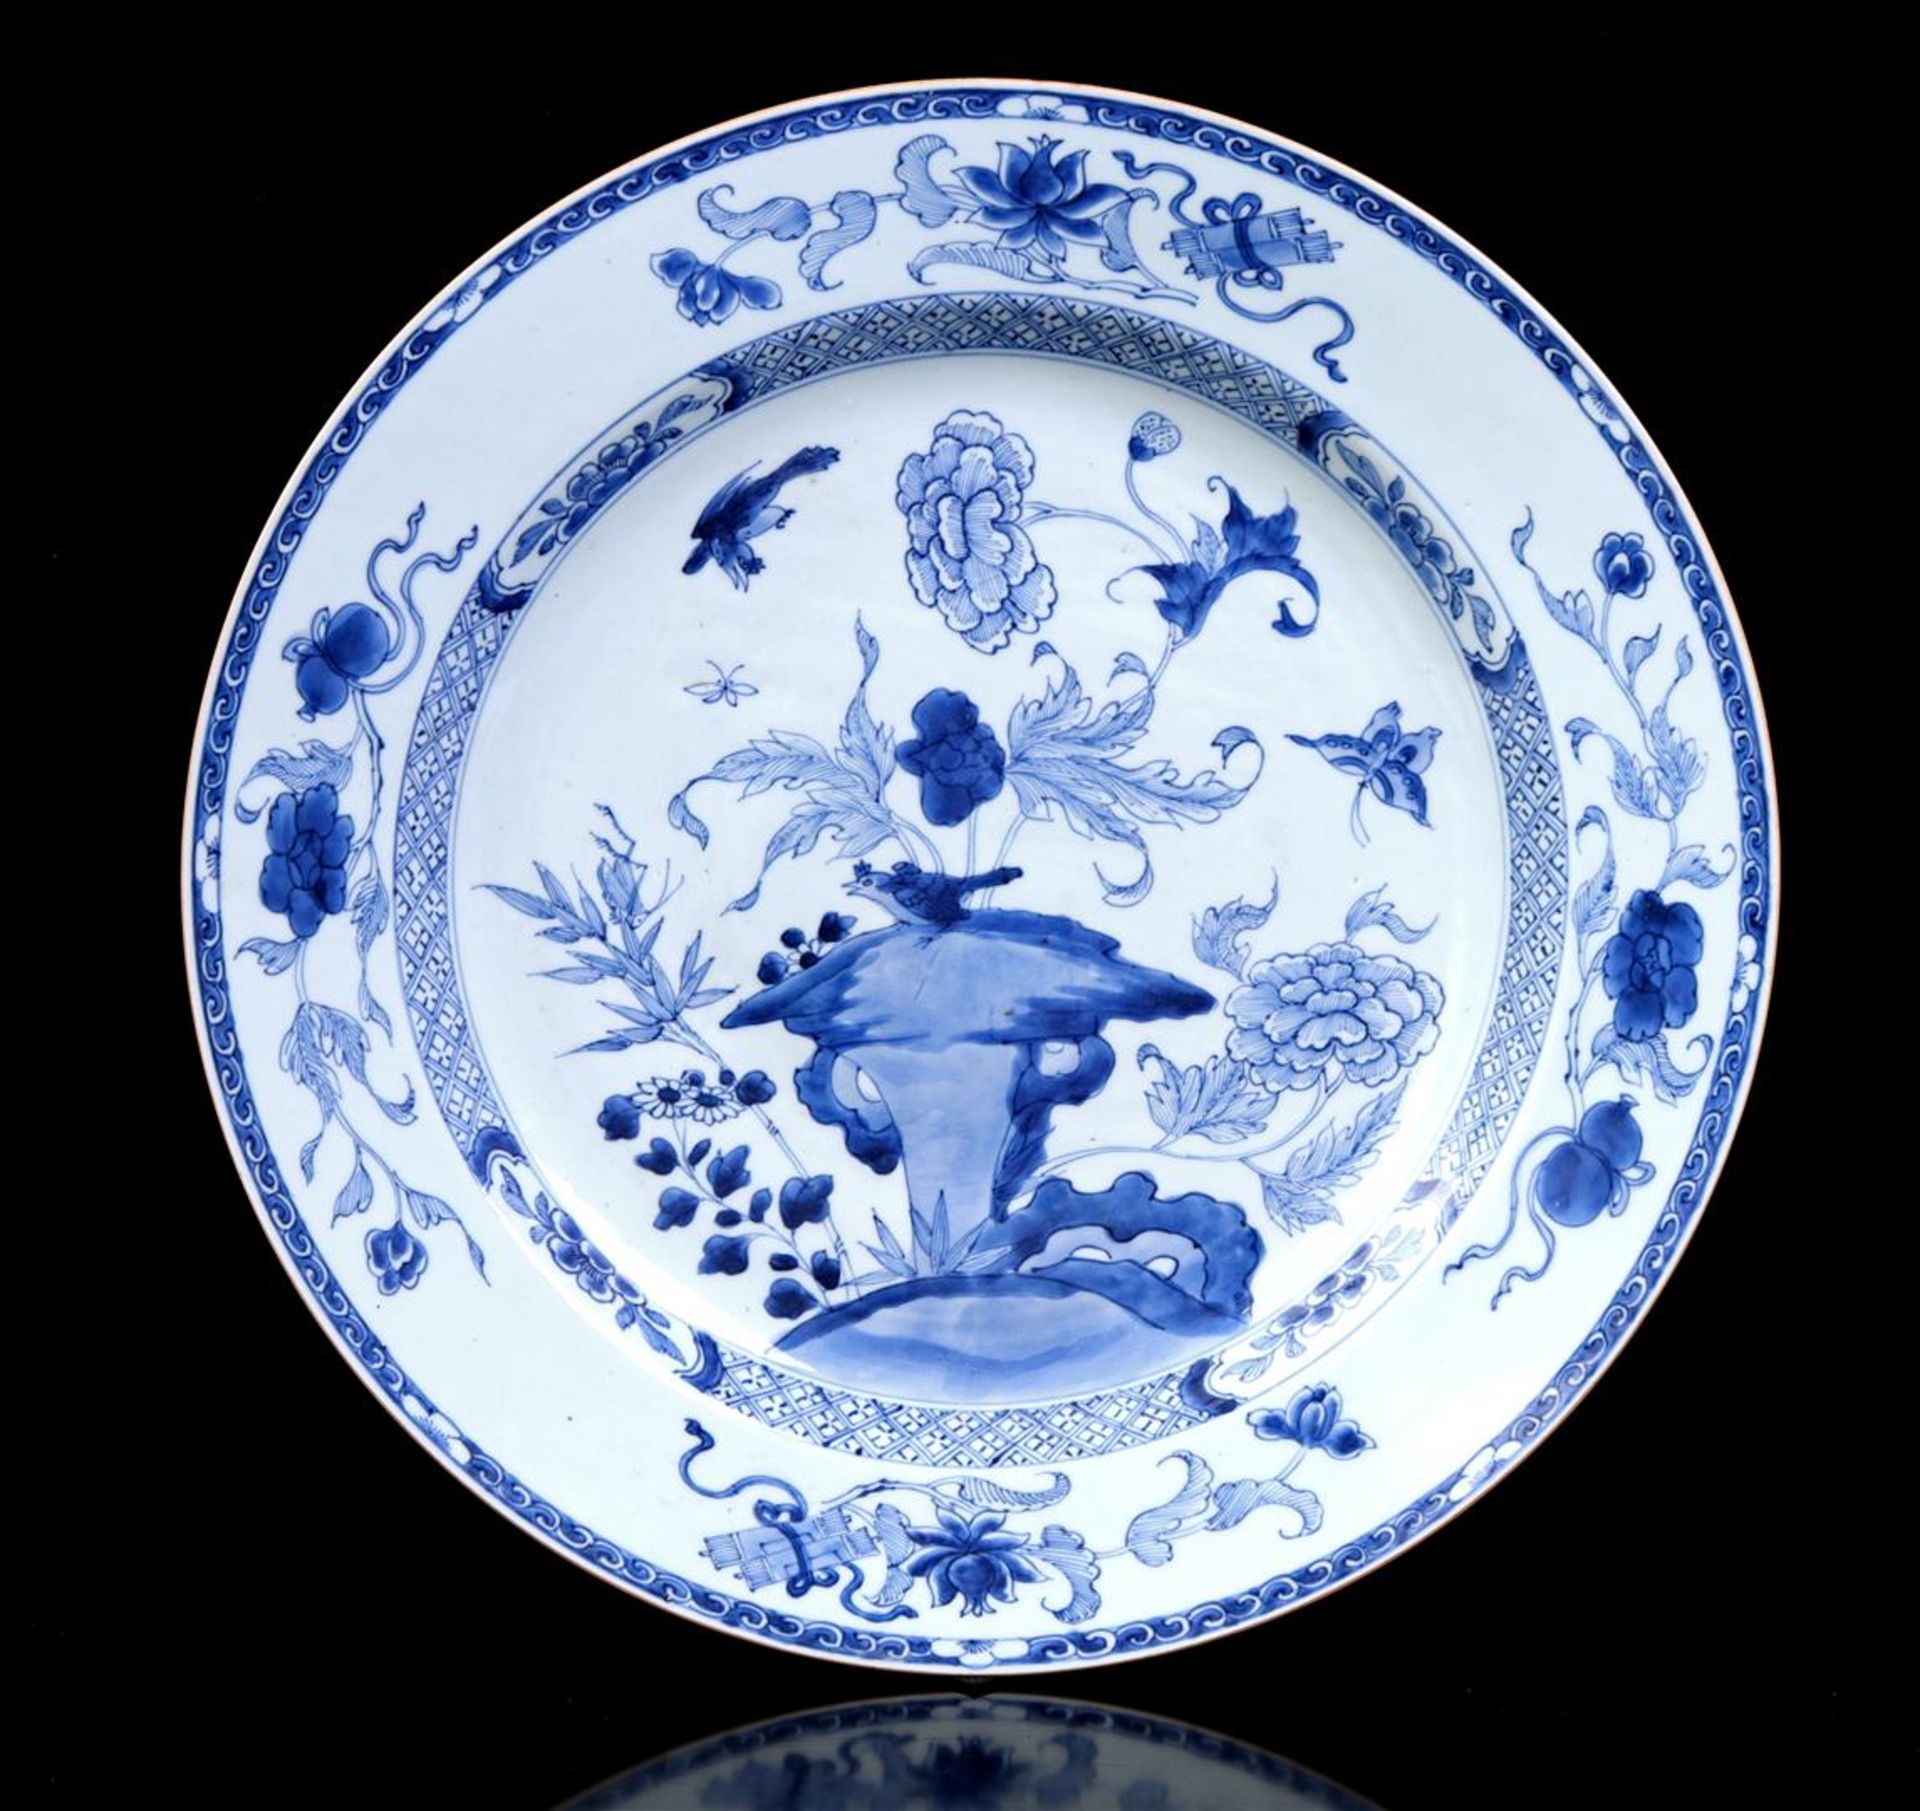 Porcelain dish with blue decoration with flowers and bird, China ca.1775, diameter 42 cm (intact)